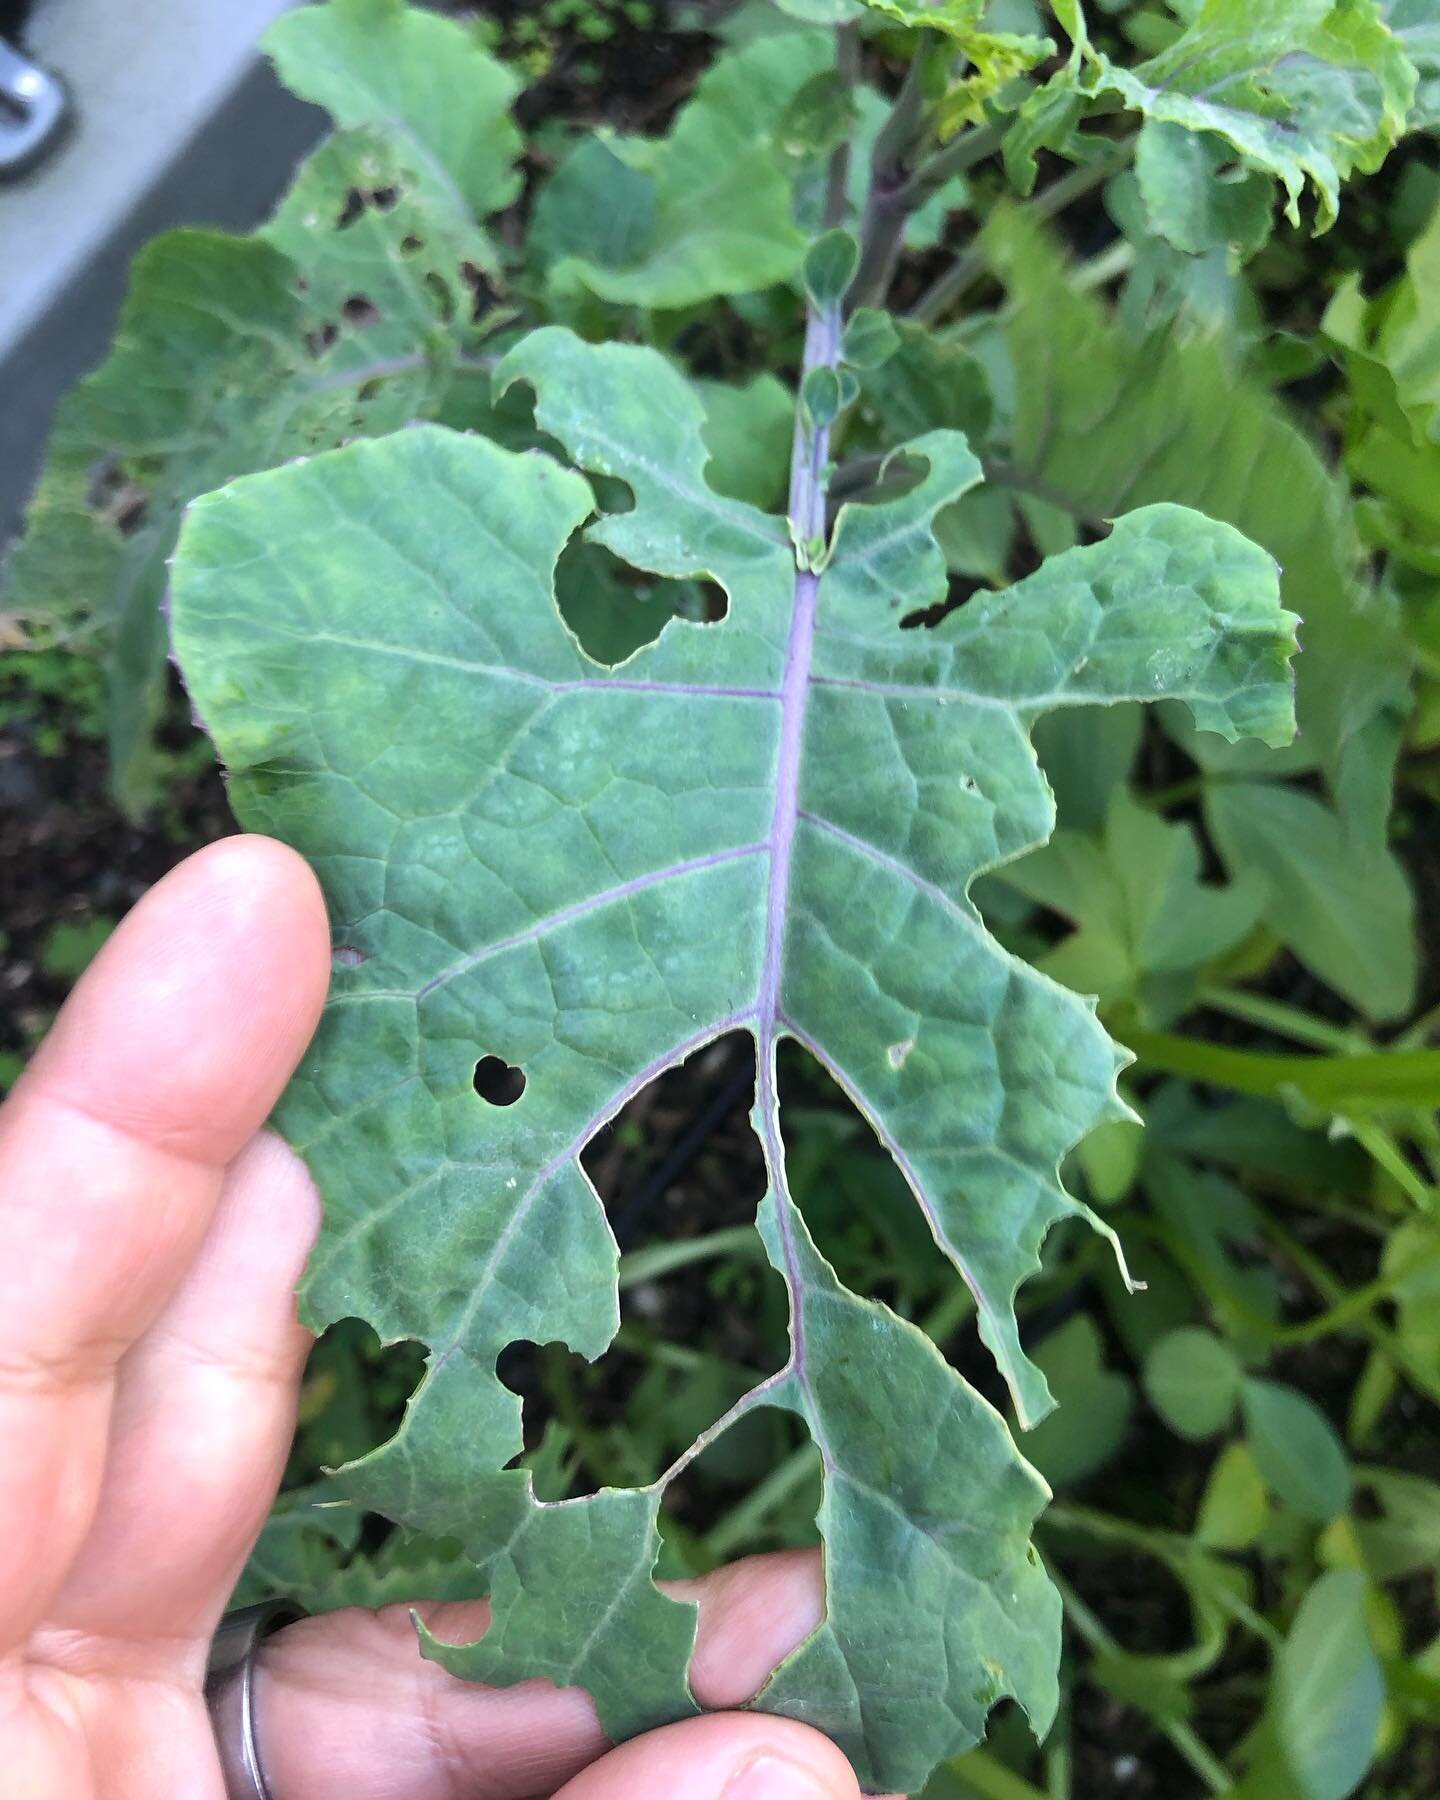 I&rsquo;m surprised to still see these little savages being that it&rsquo;s so cold out. Usually they go away during the winter months here in the Bay Area. These will be feed to my tiny dinos. Are you still seeing cabbage moth caterpillars in your g